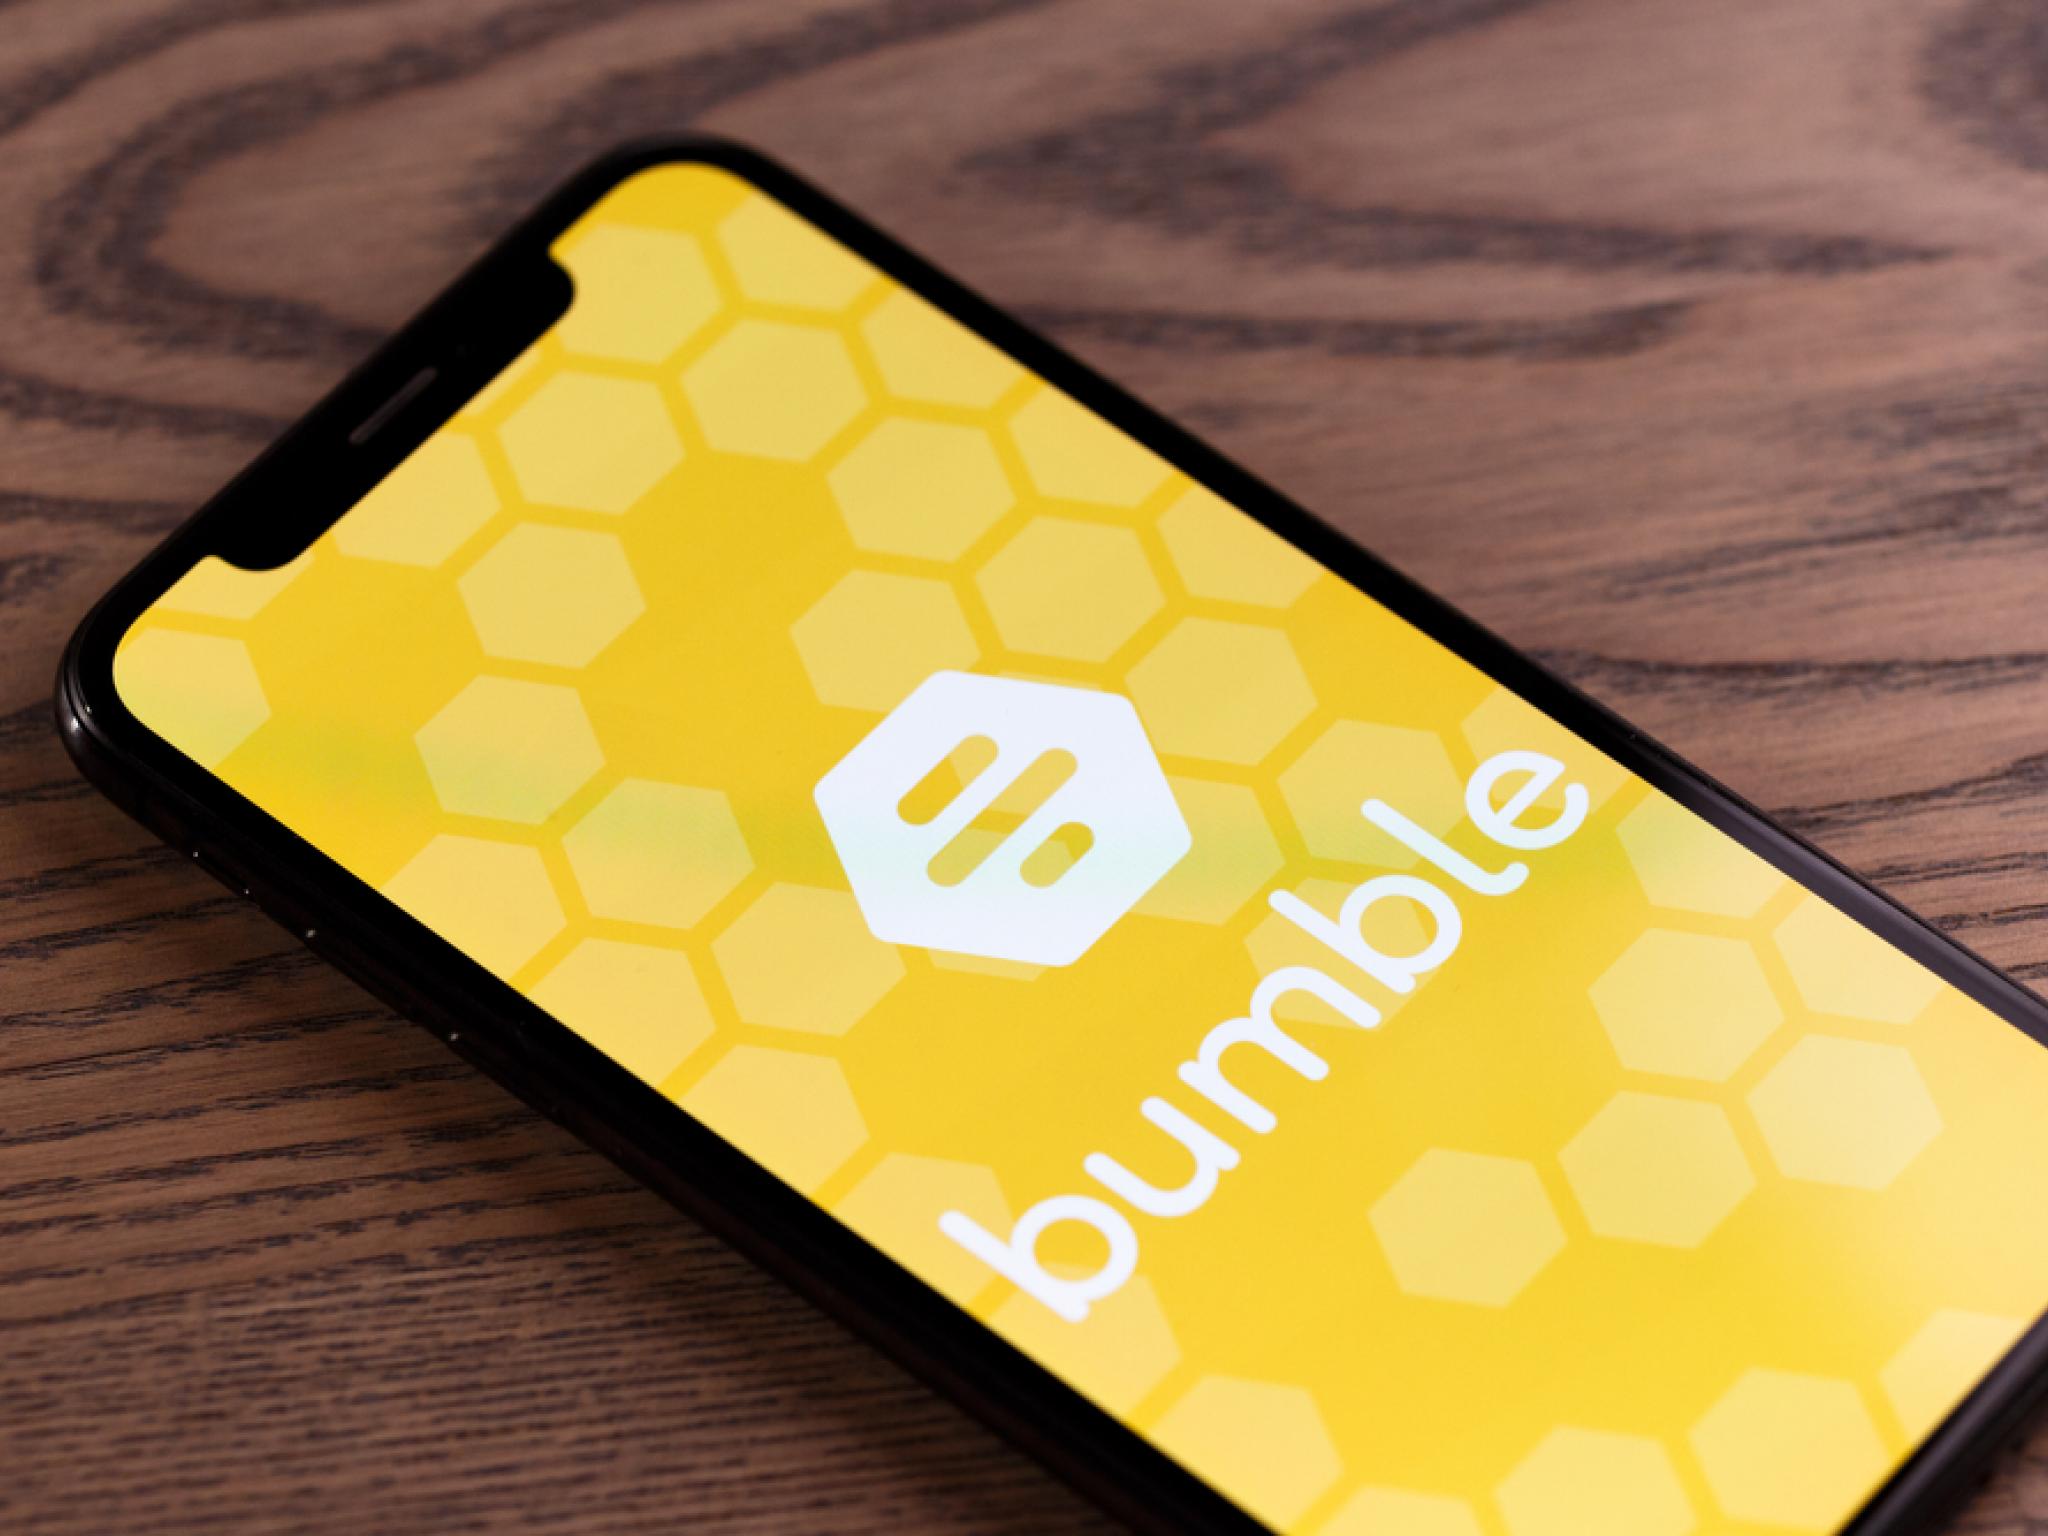  bumble-shares-soar-on-q1-earnings-beat-the-details 